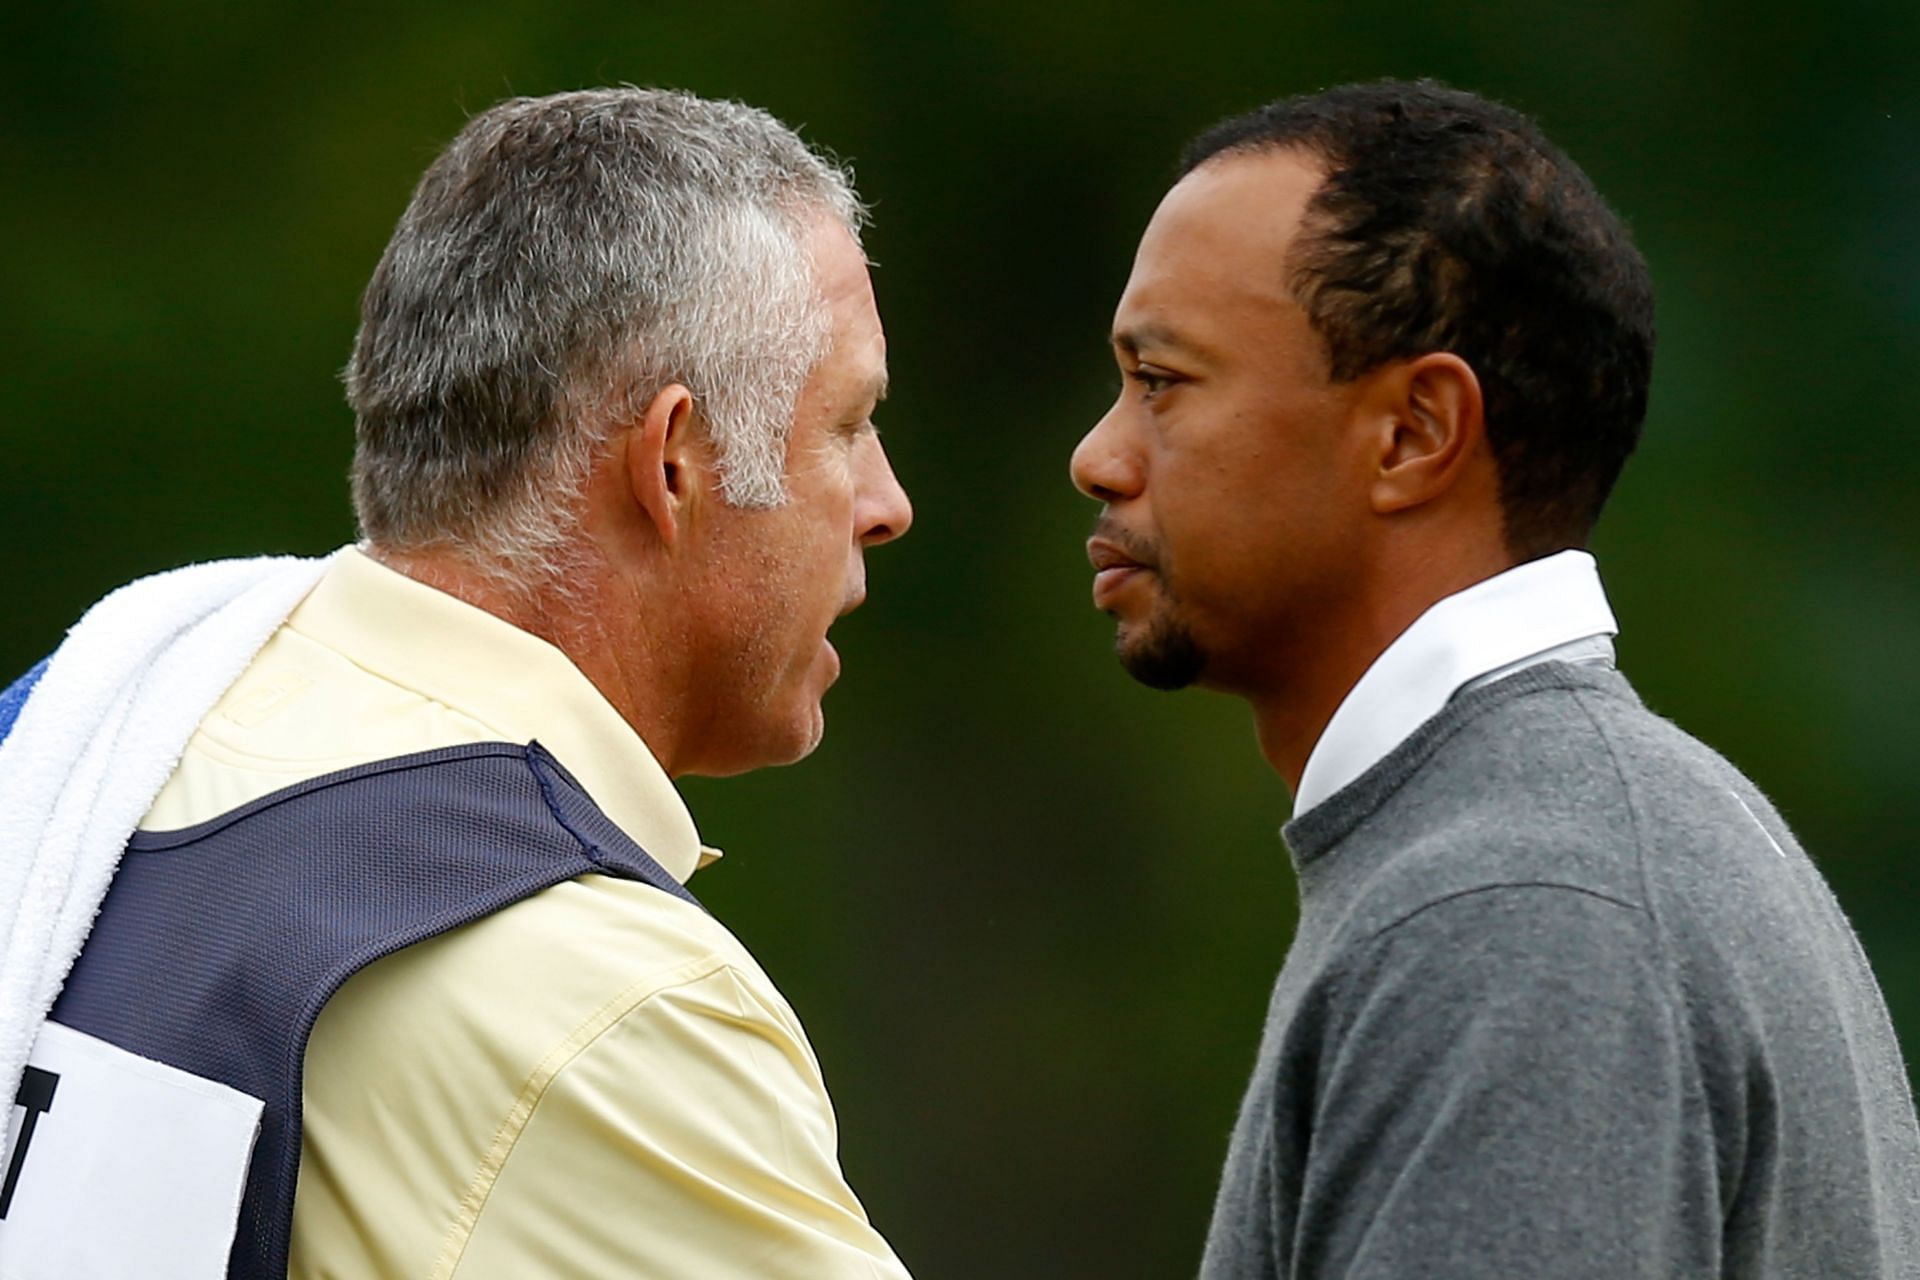 Steve Williams and Tiger Woods at the US Open - Round One (Image via Scott Halleran/Getty Images)